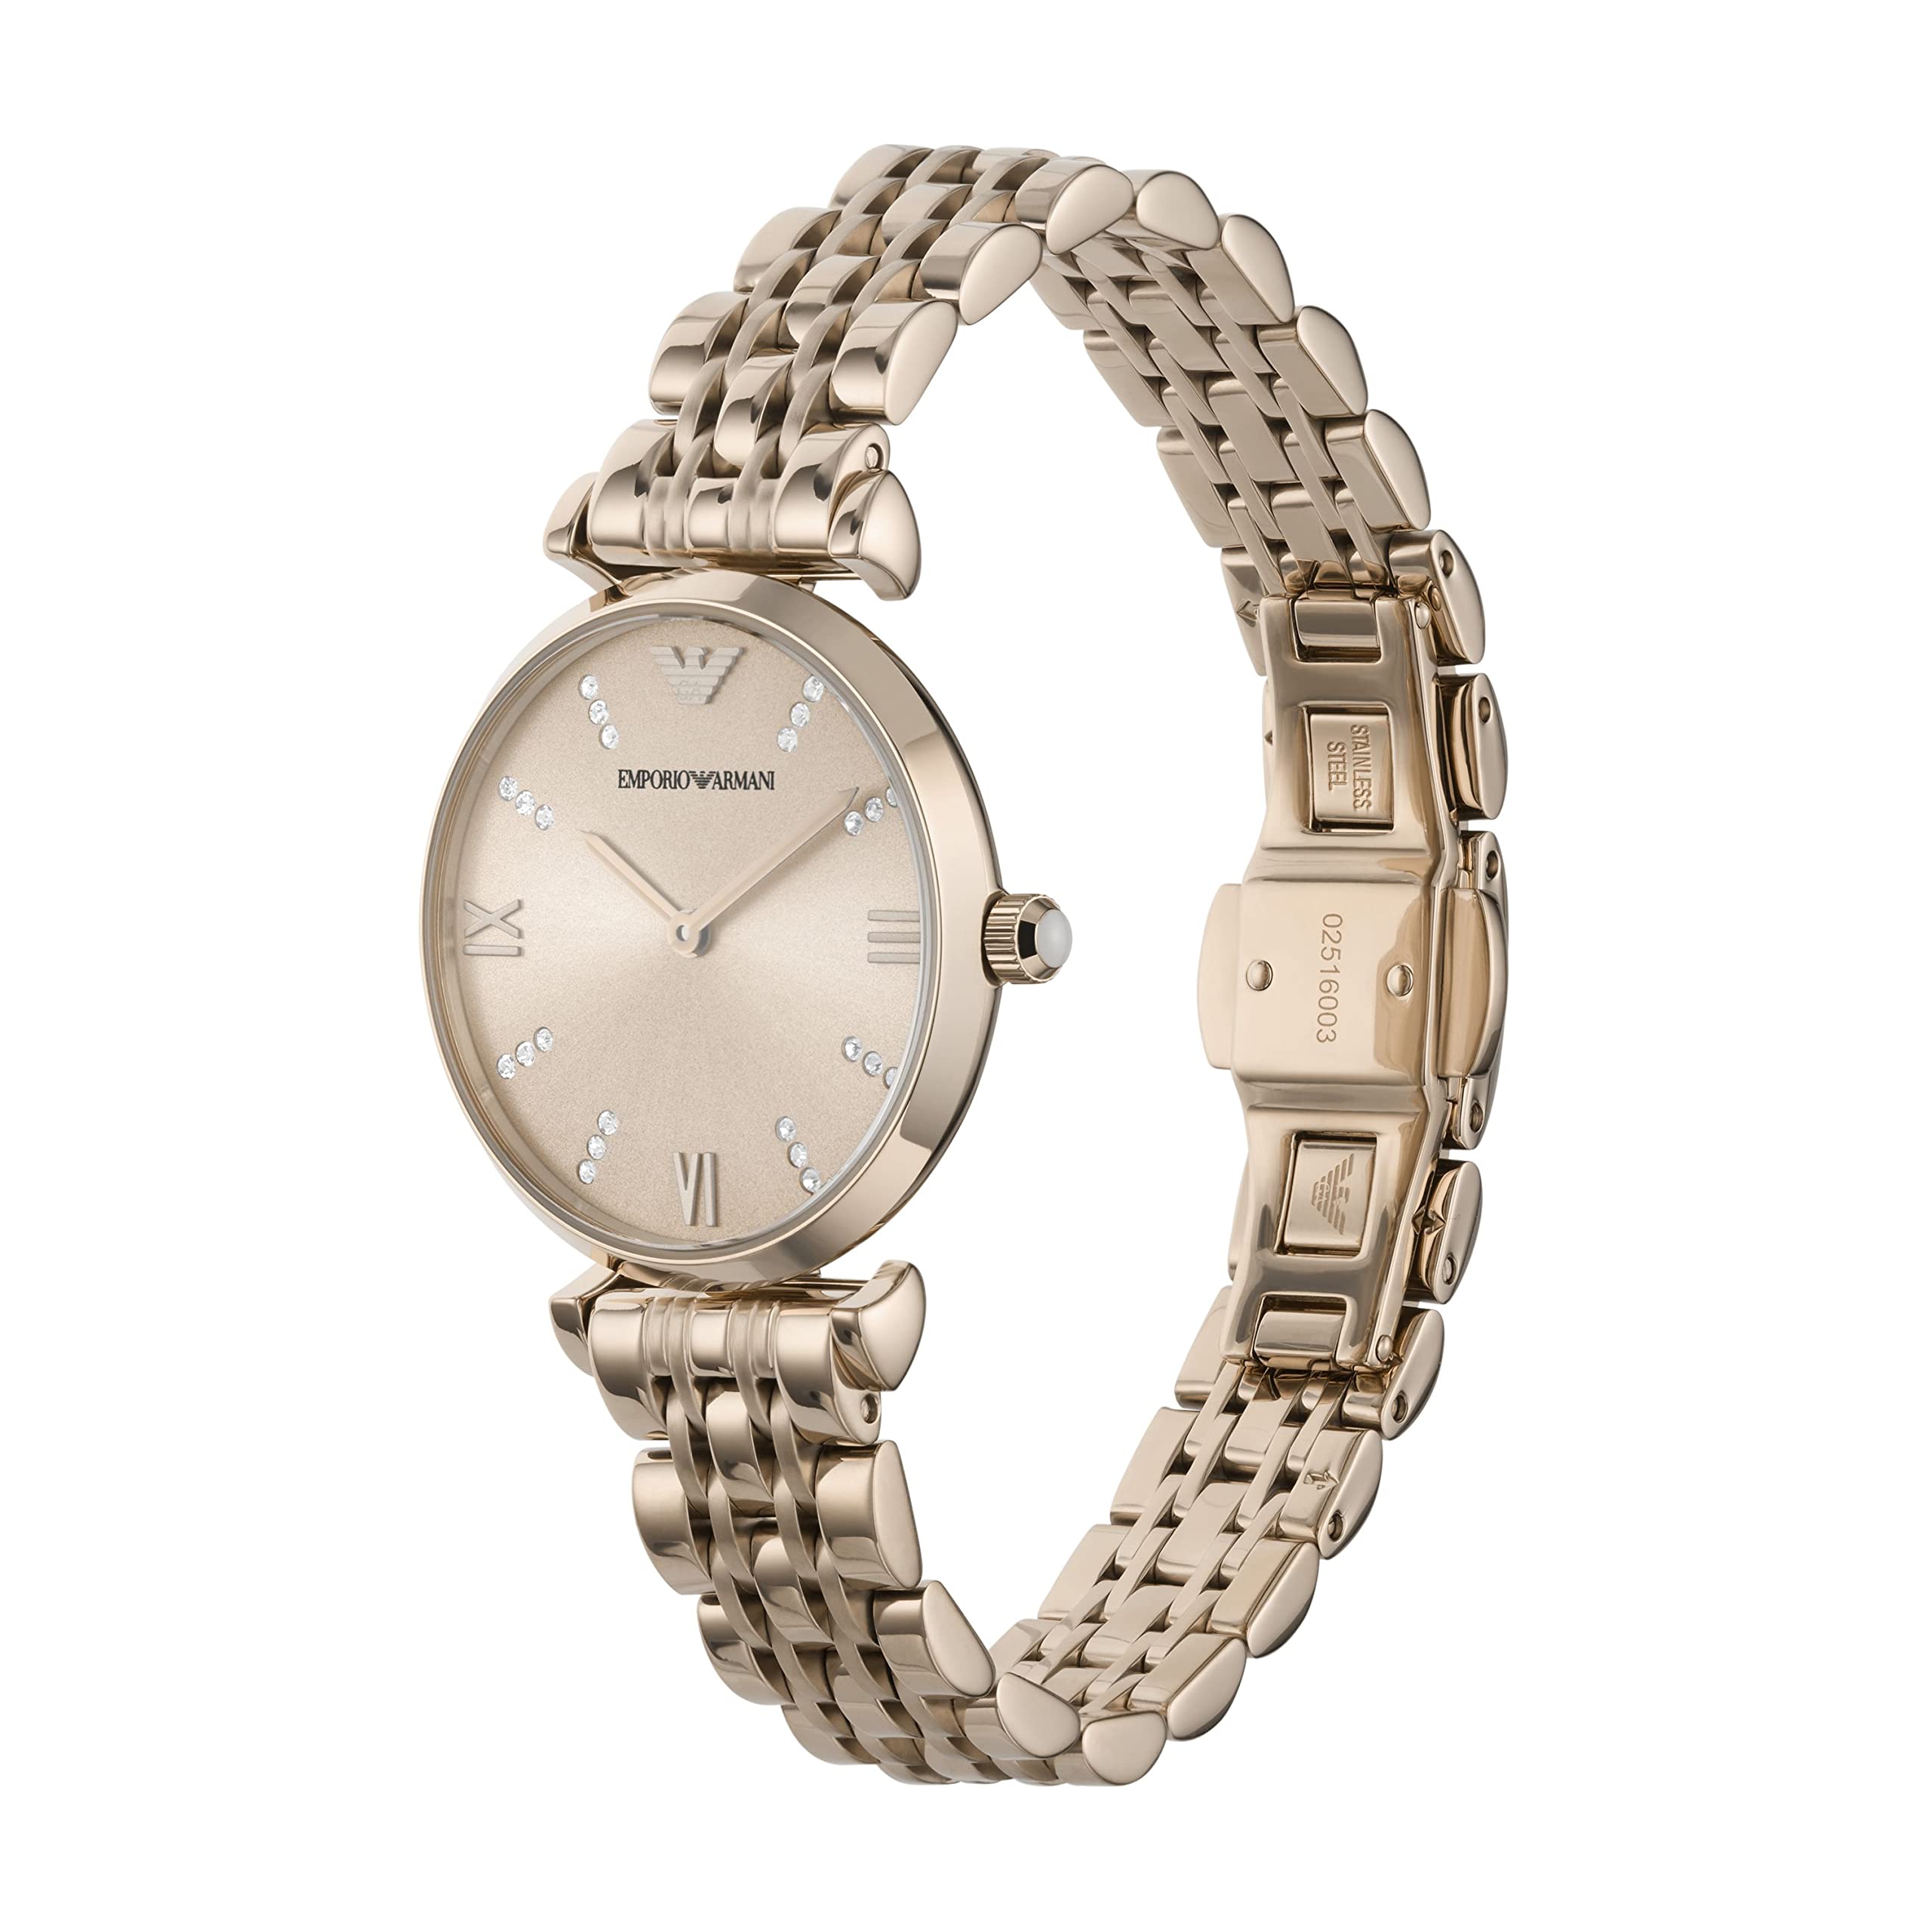 Emporio Armani Women's Dress Watch with Stainless Steel Band